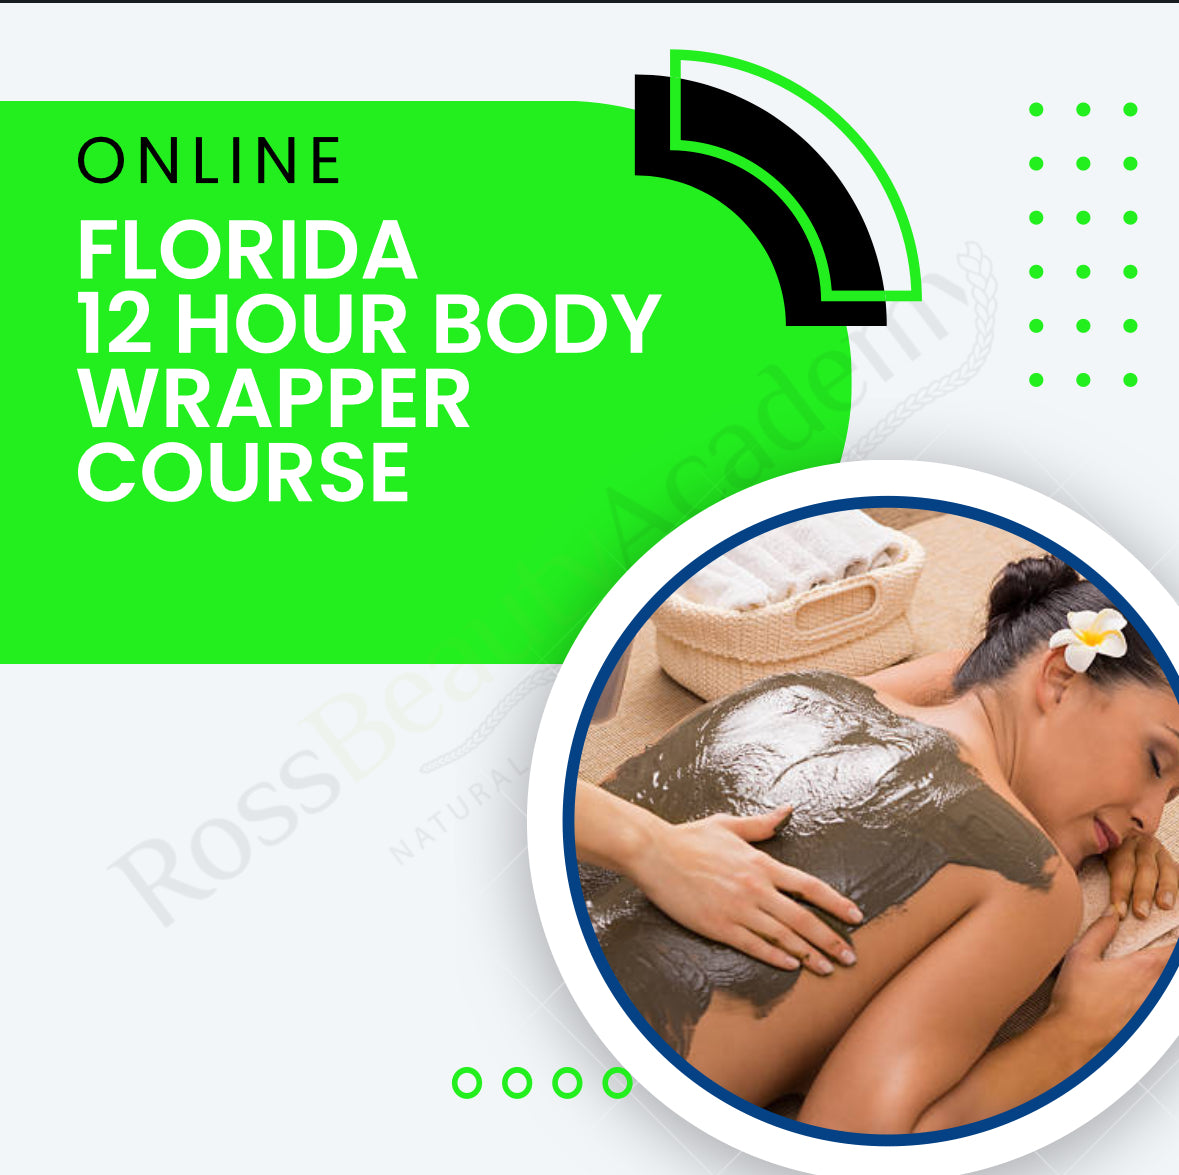 12 Hour Florida Body Wrapper Online Course